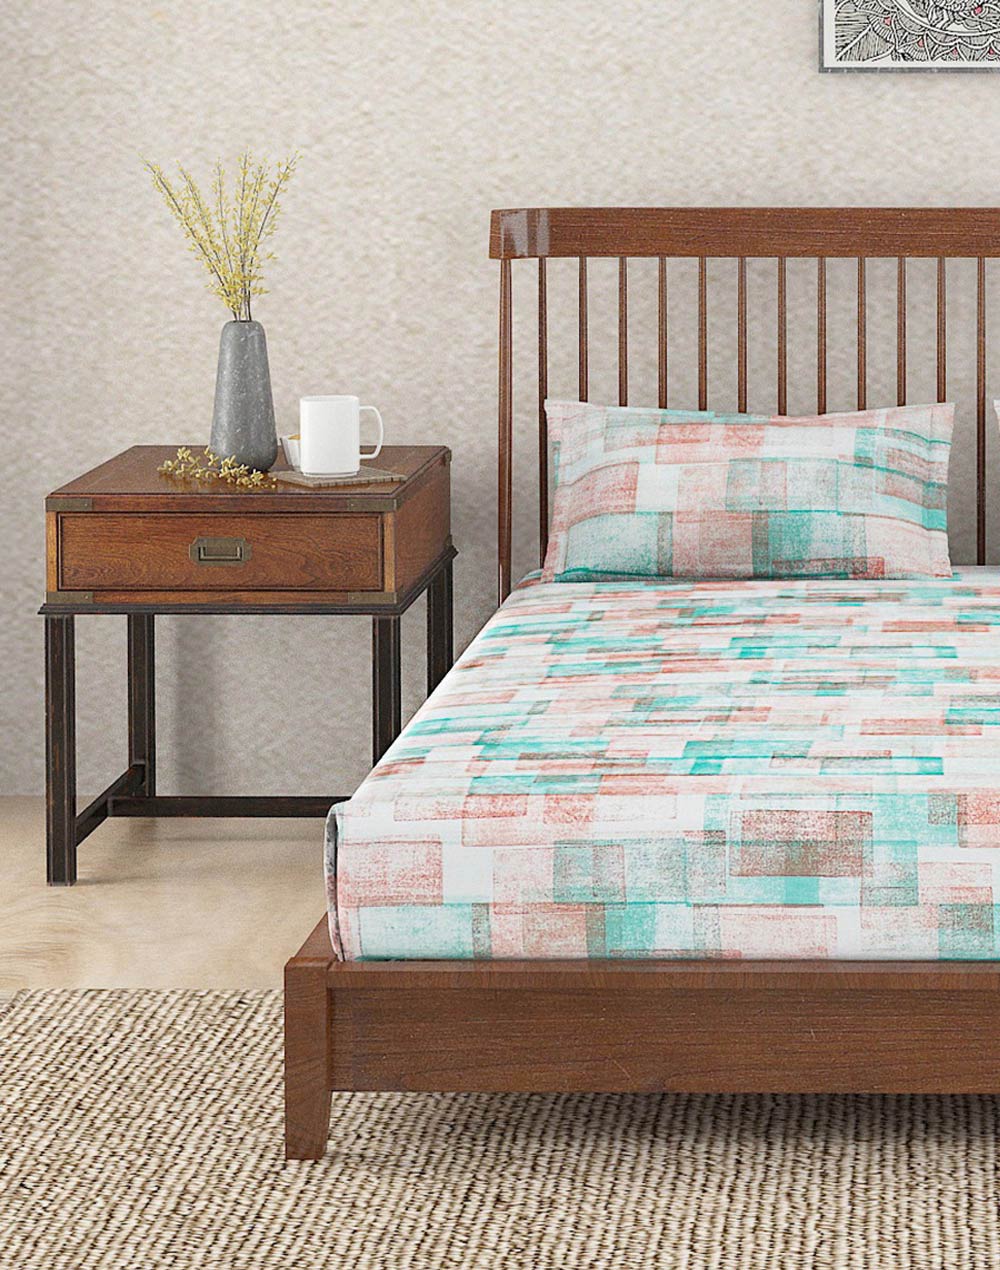 Teal Symphony Cotton Printed Single Bed Sheet Set With 1 Pillow Cover